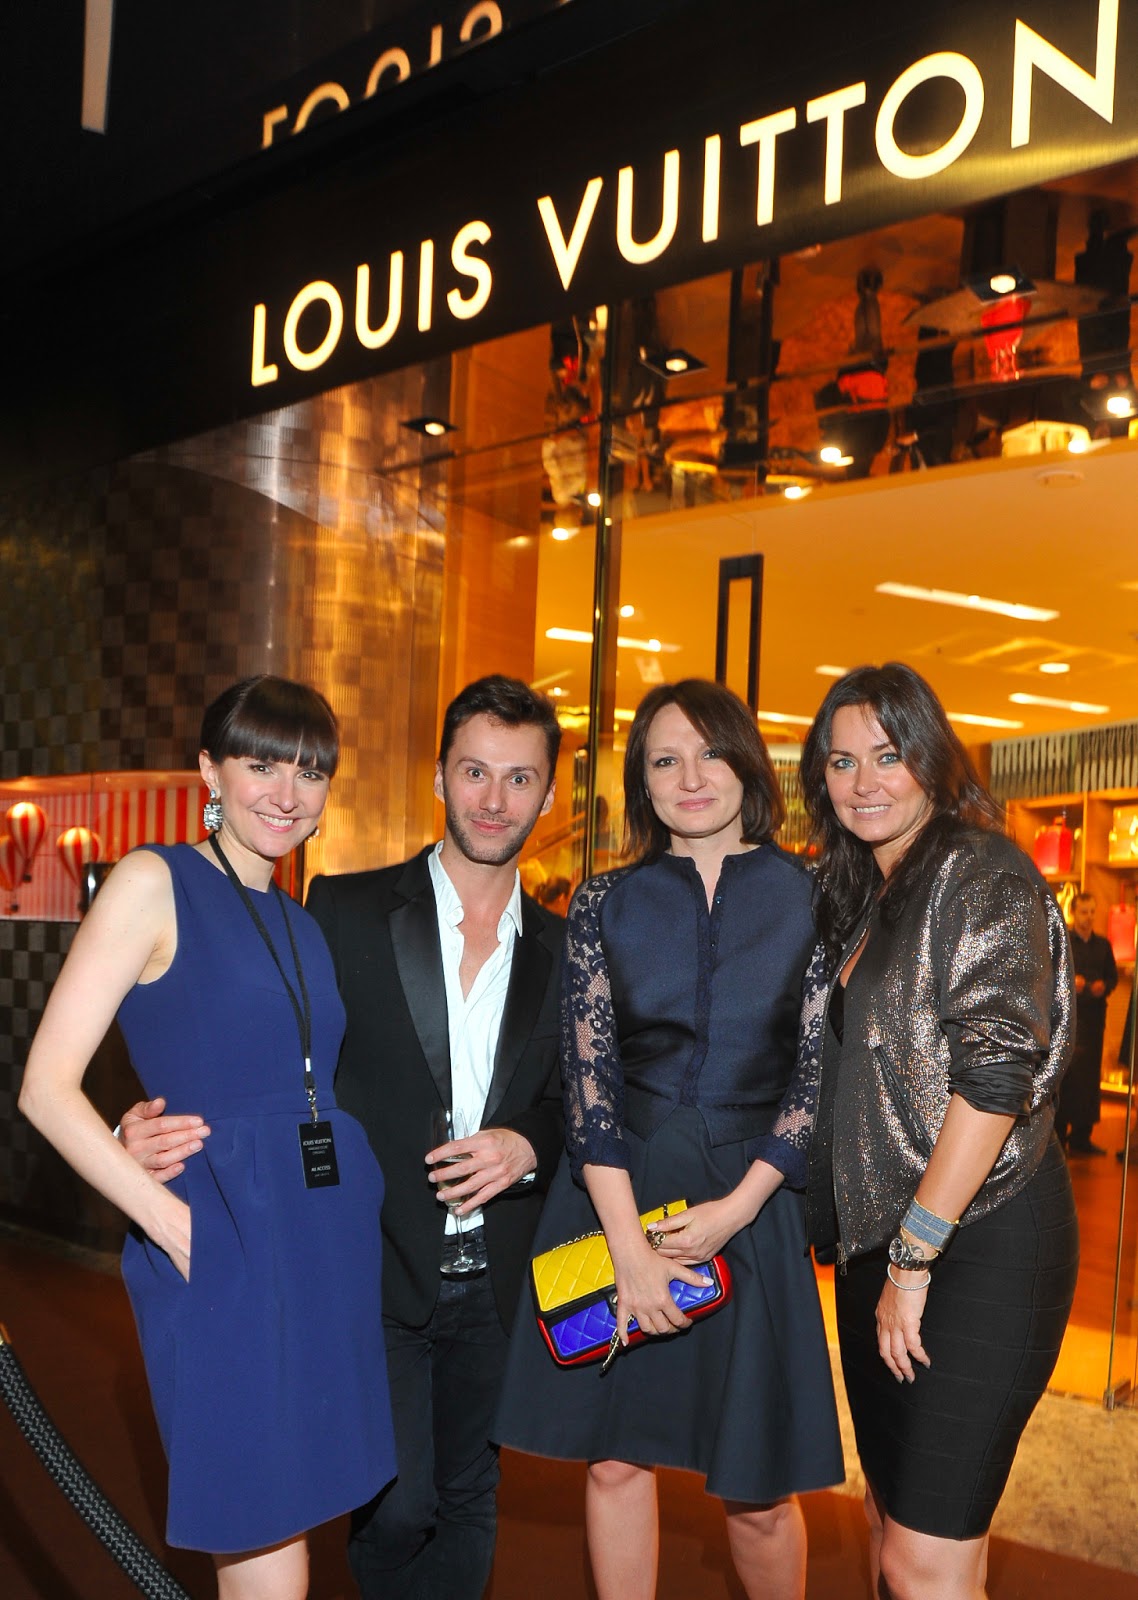 magda about town: Oh la class comes to Warsaw! The opening of Louis Vuitton.